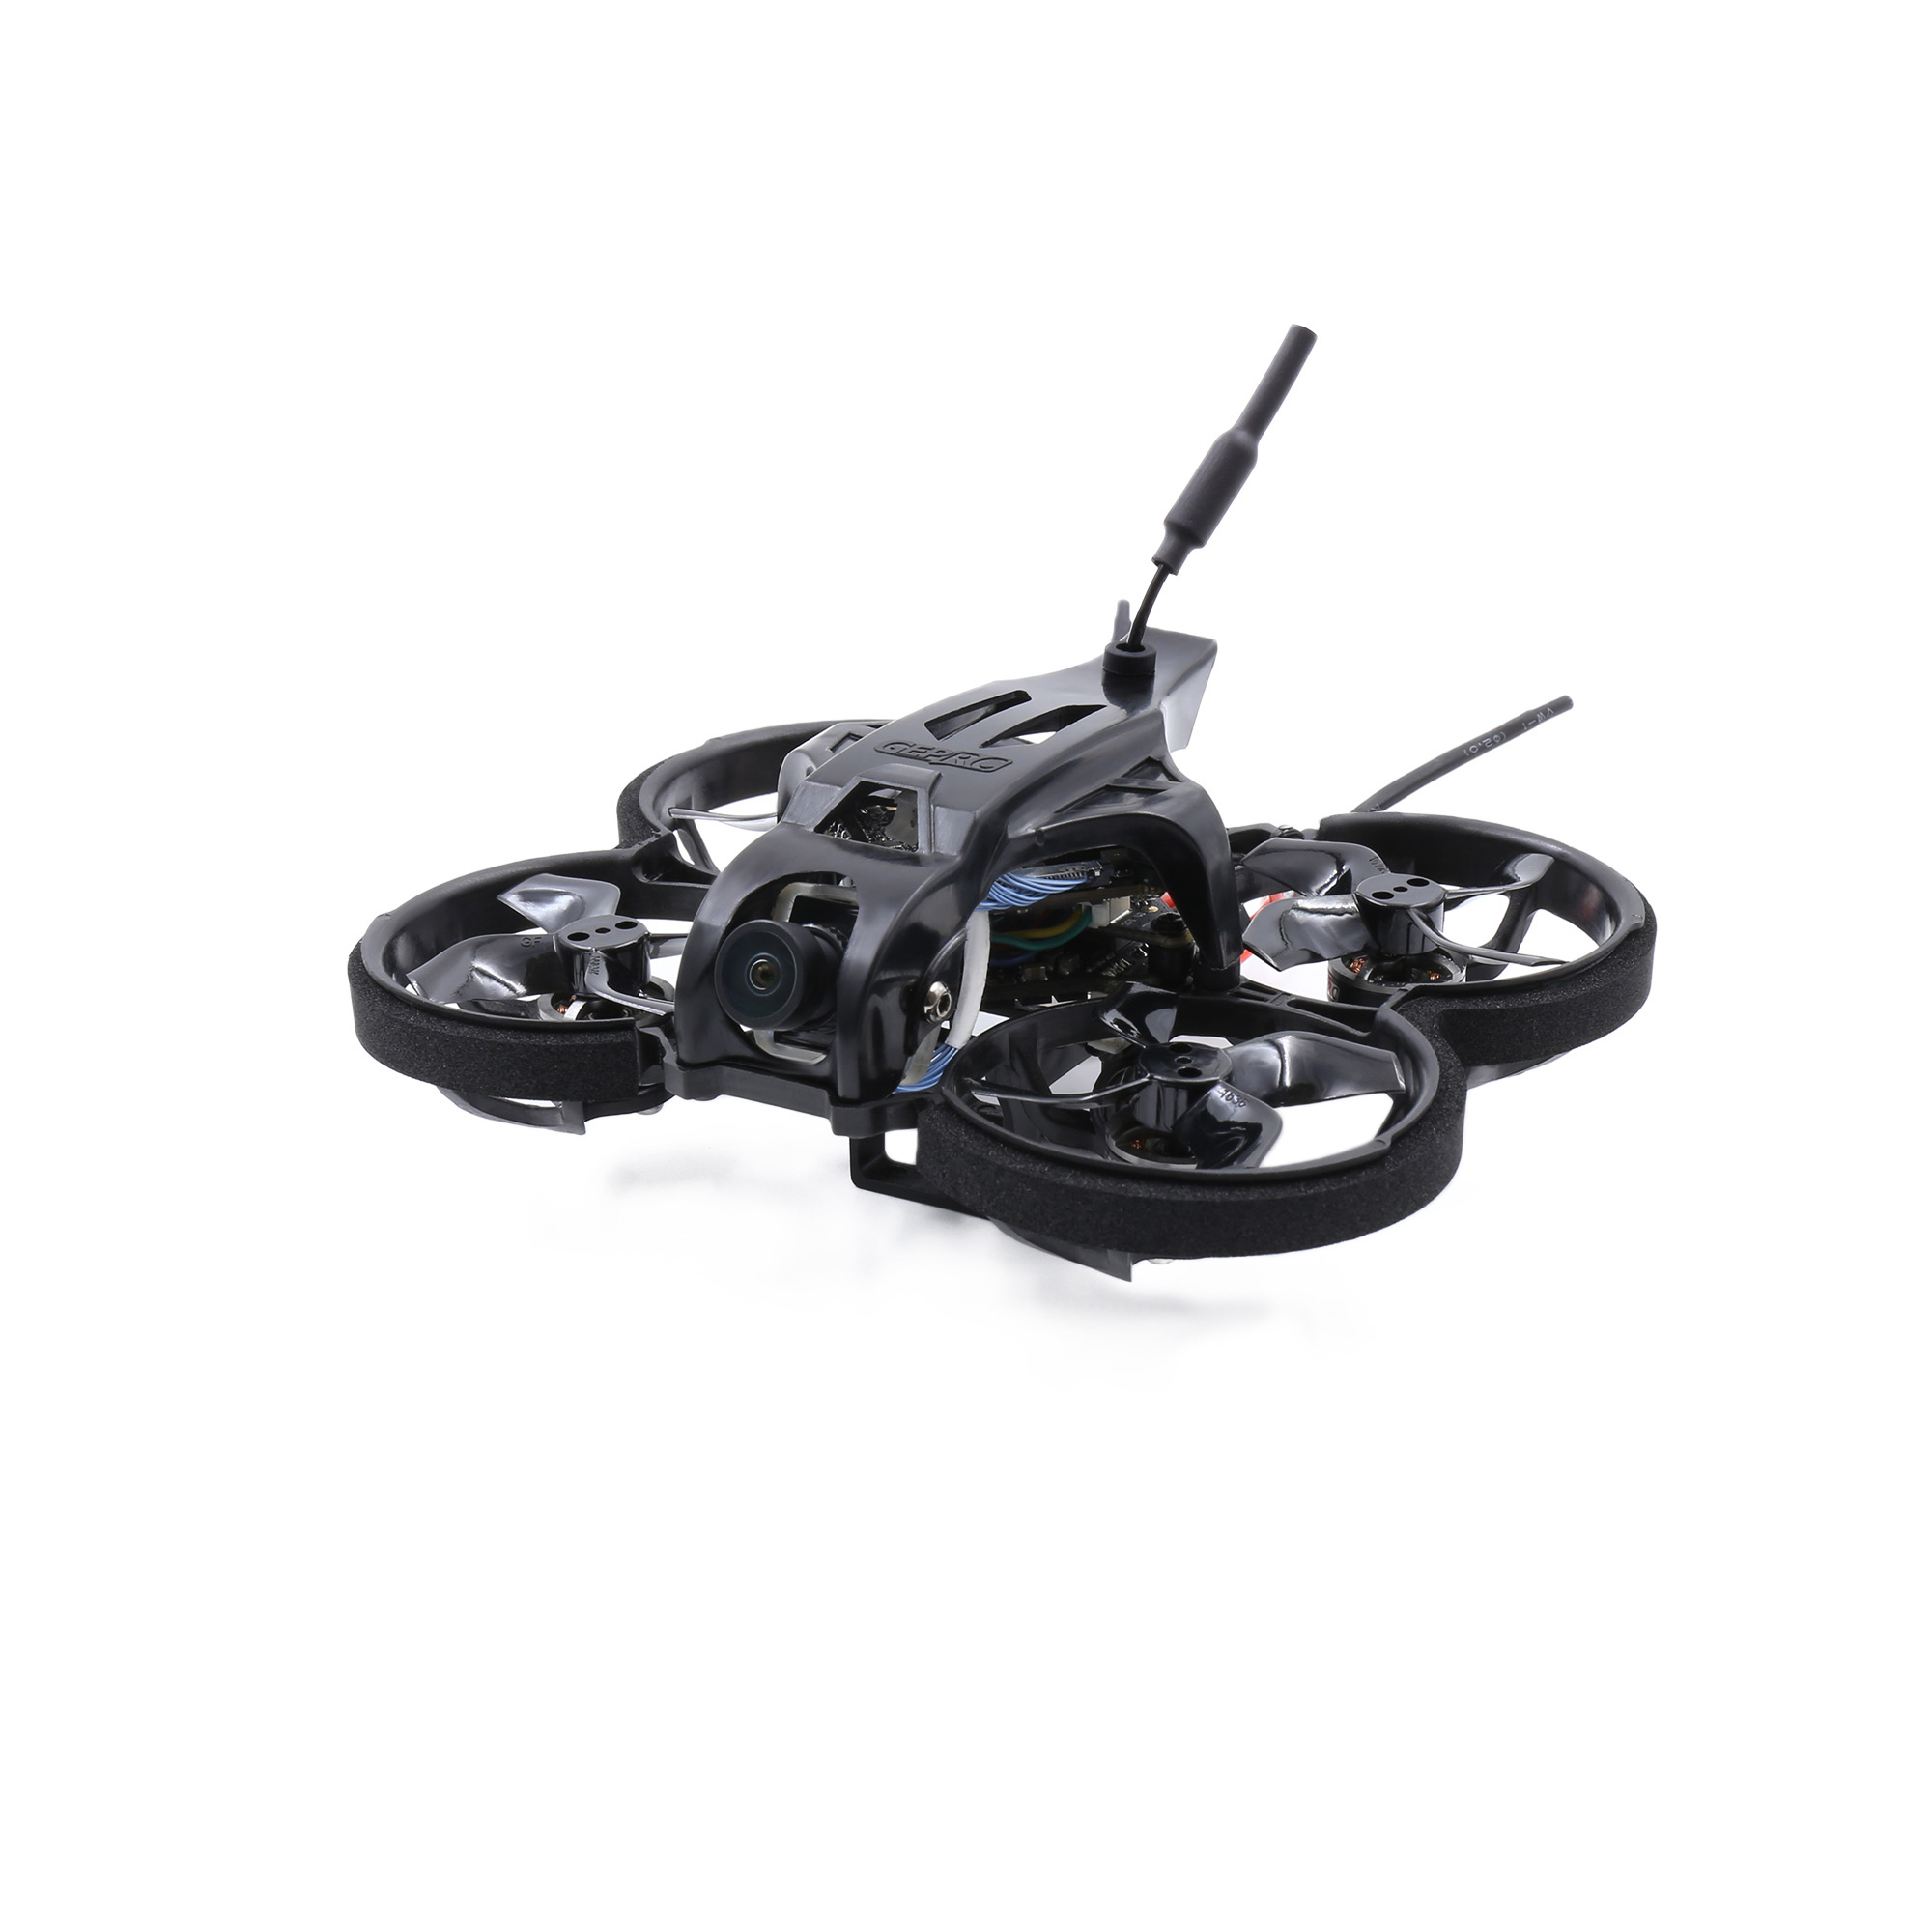 GEPRC TinyGO 1.6inch 2S 4K Caddx Loris FPV Indoor Whoop+GR8 Remote Controller+RG1 Goggles RTF Ready To Fly FPV Racing RC Drone - Photo: 3